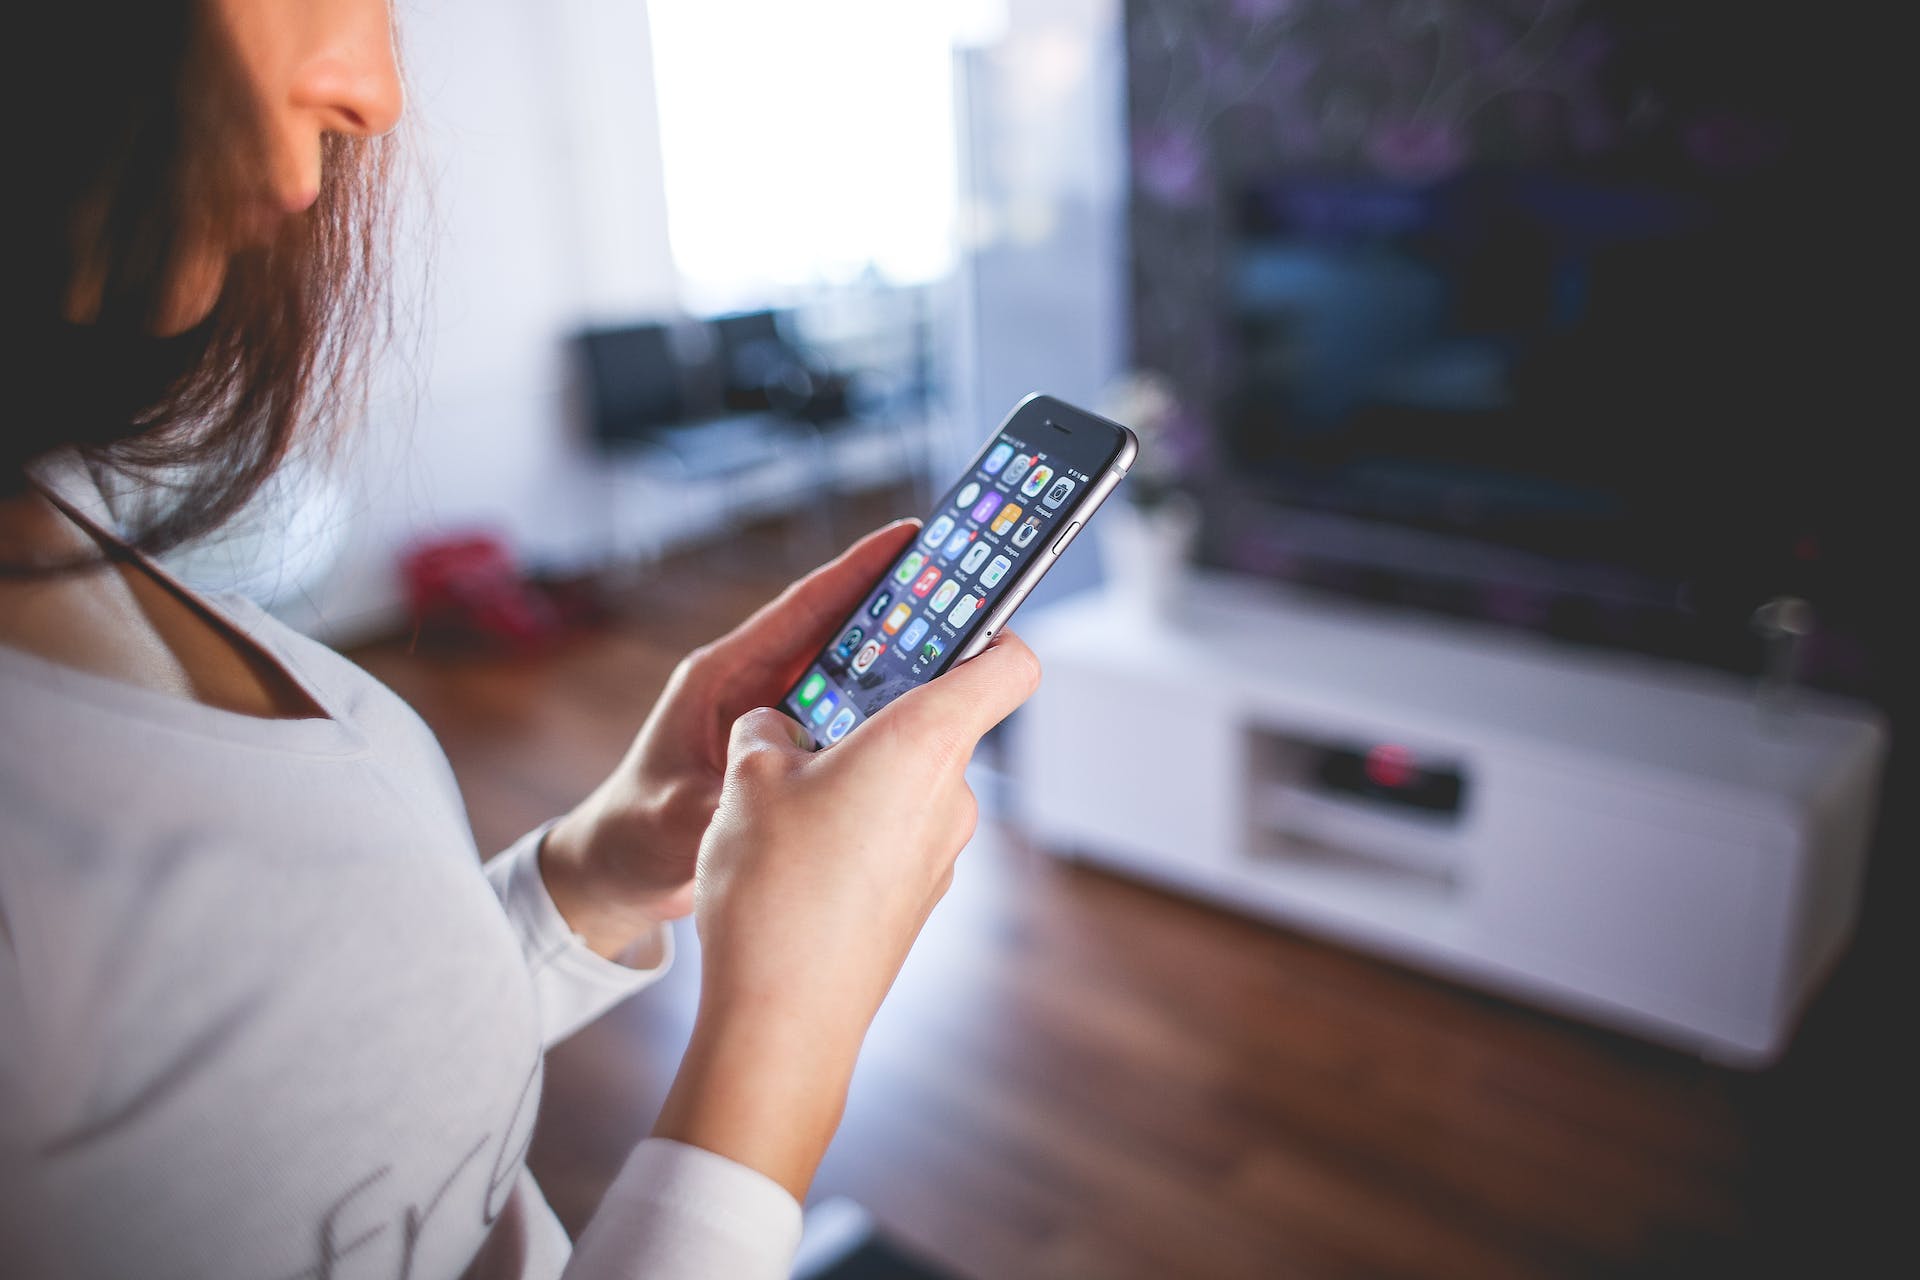 A woman using her smart phone | Source: Pexels